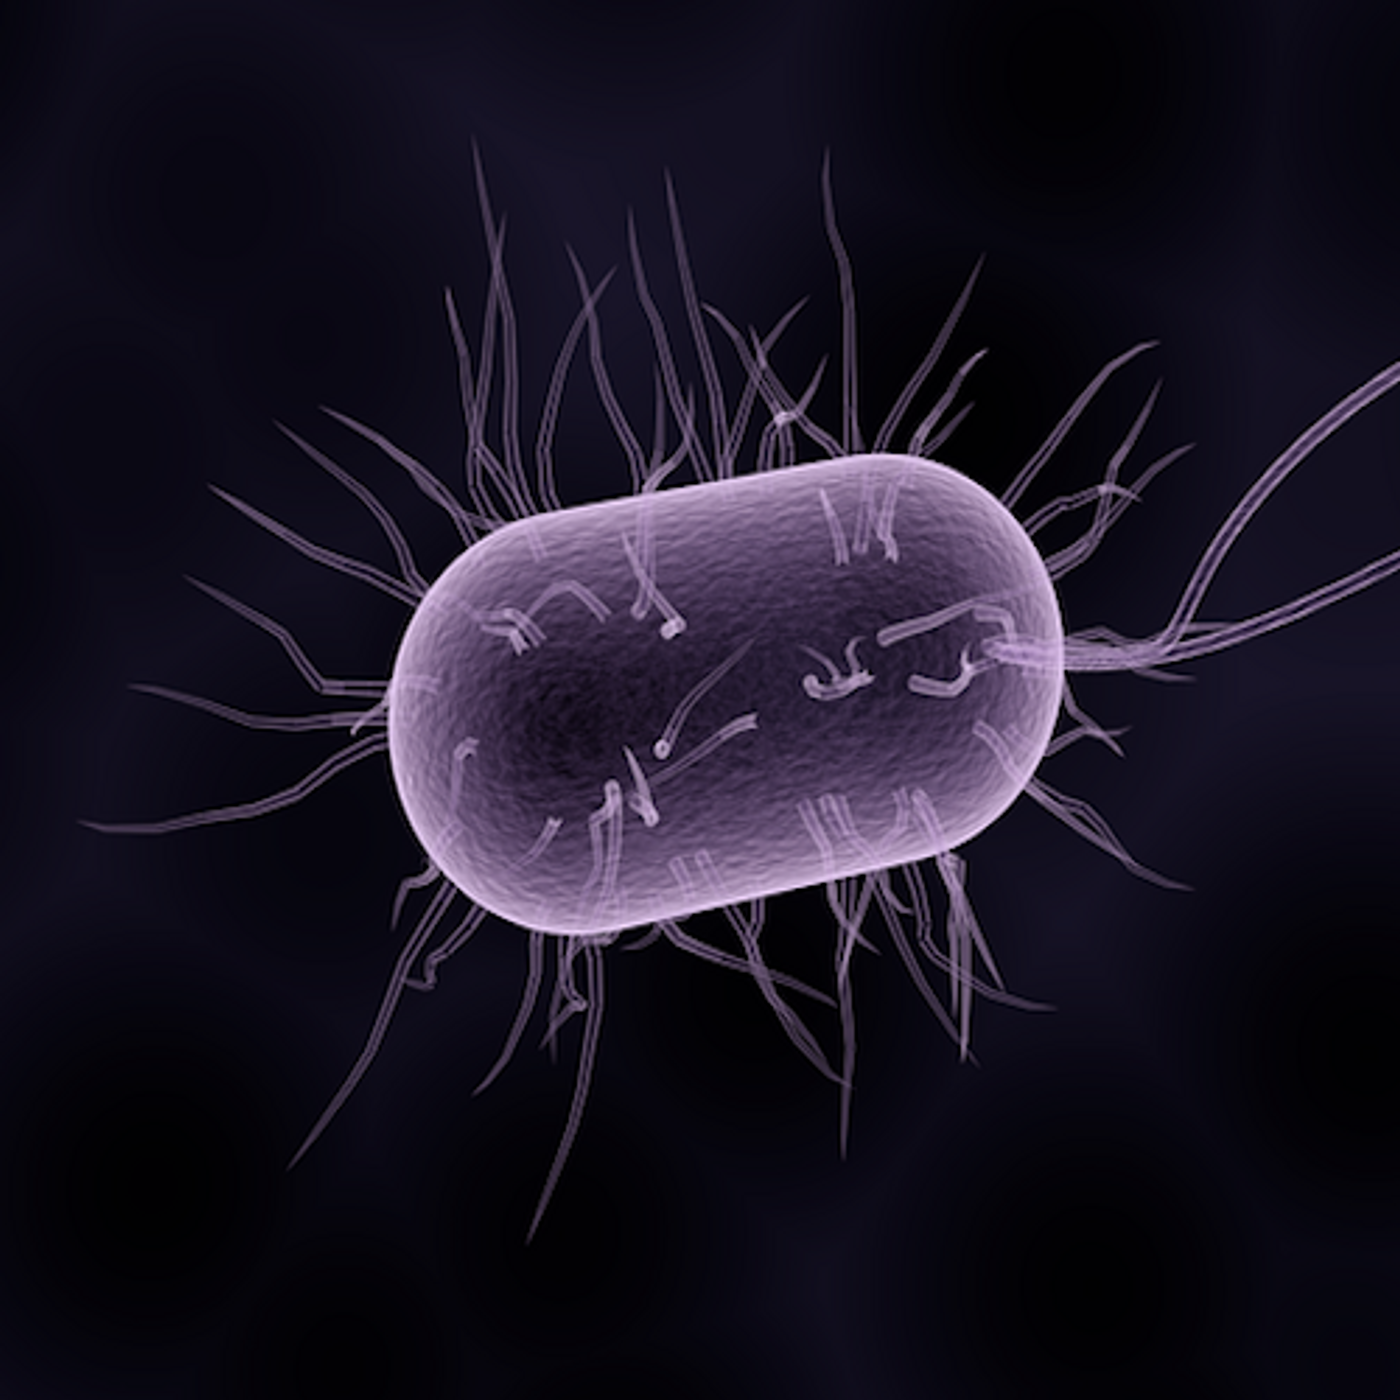 Some microbes can report on their environment. Now, scientists have made them 'remember' the event. / Image credit: Pixabay